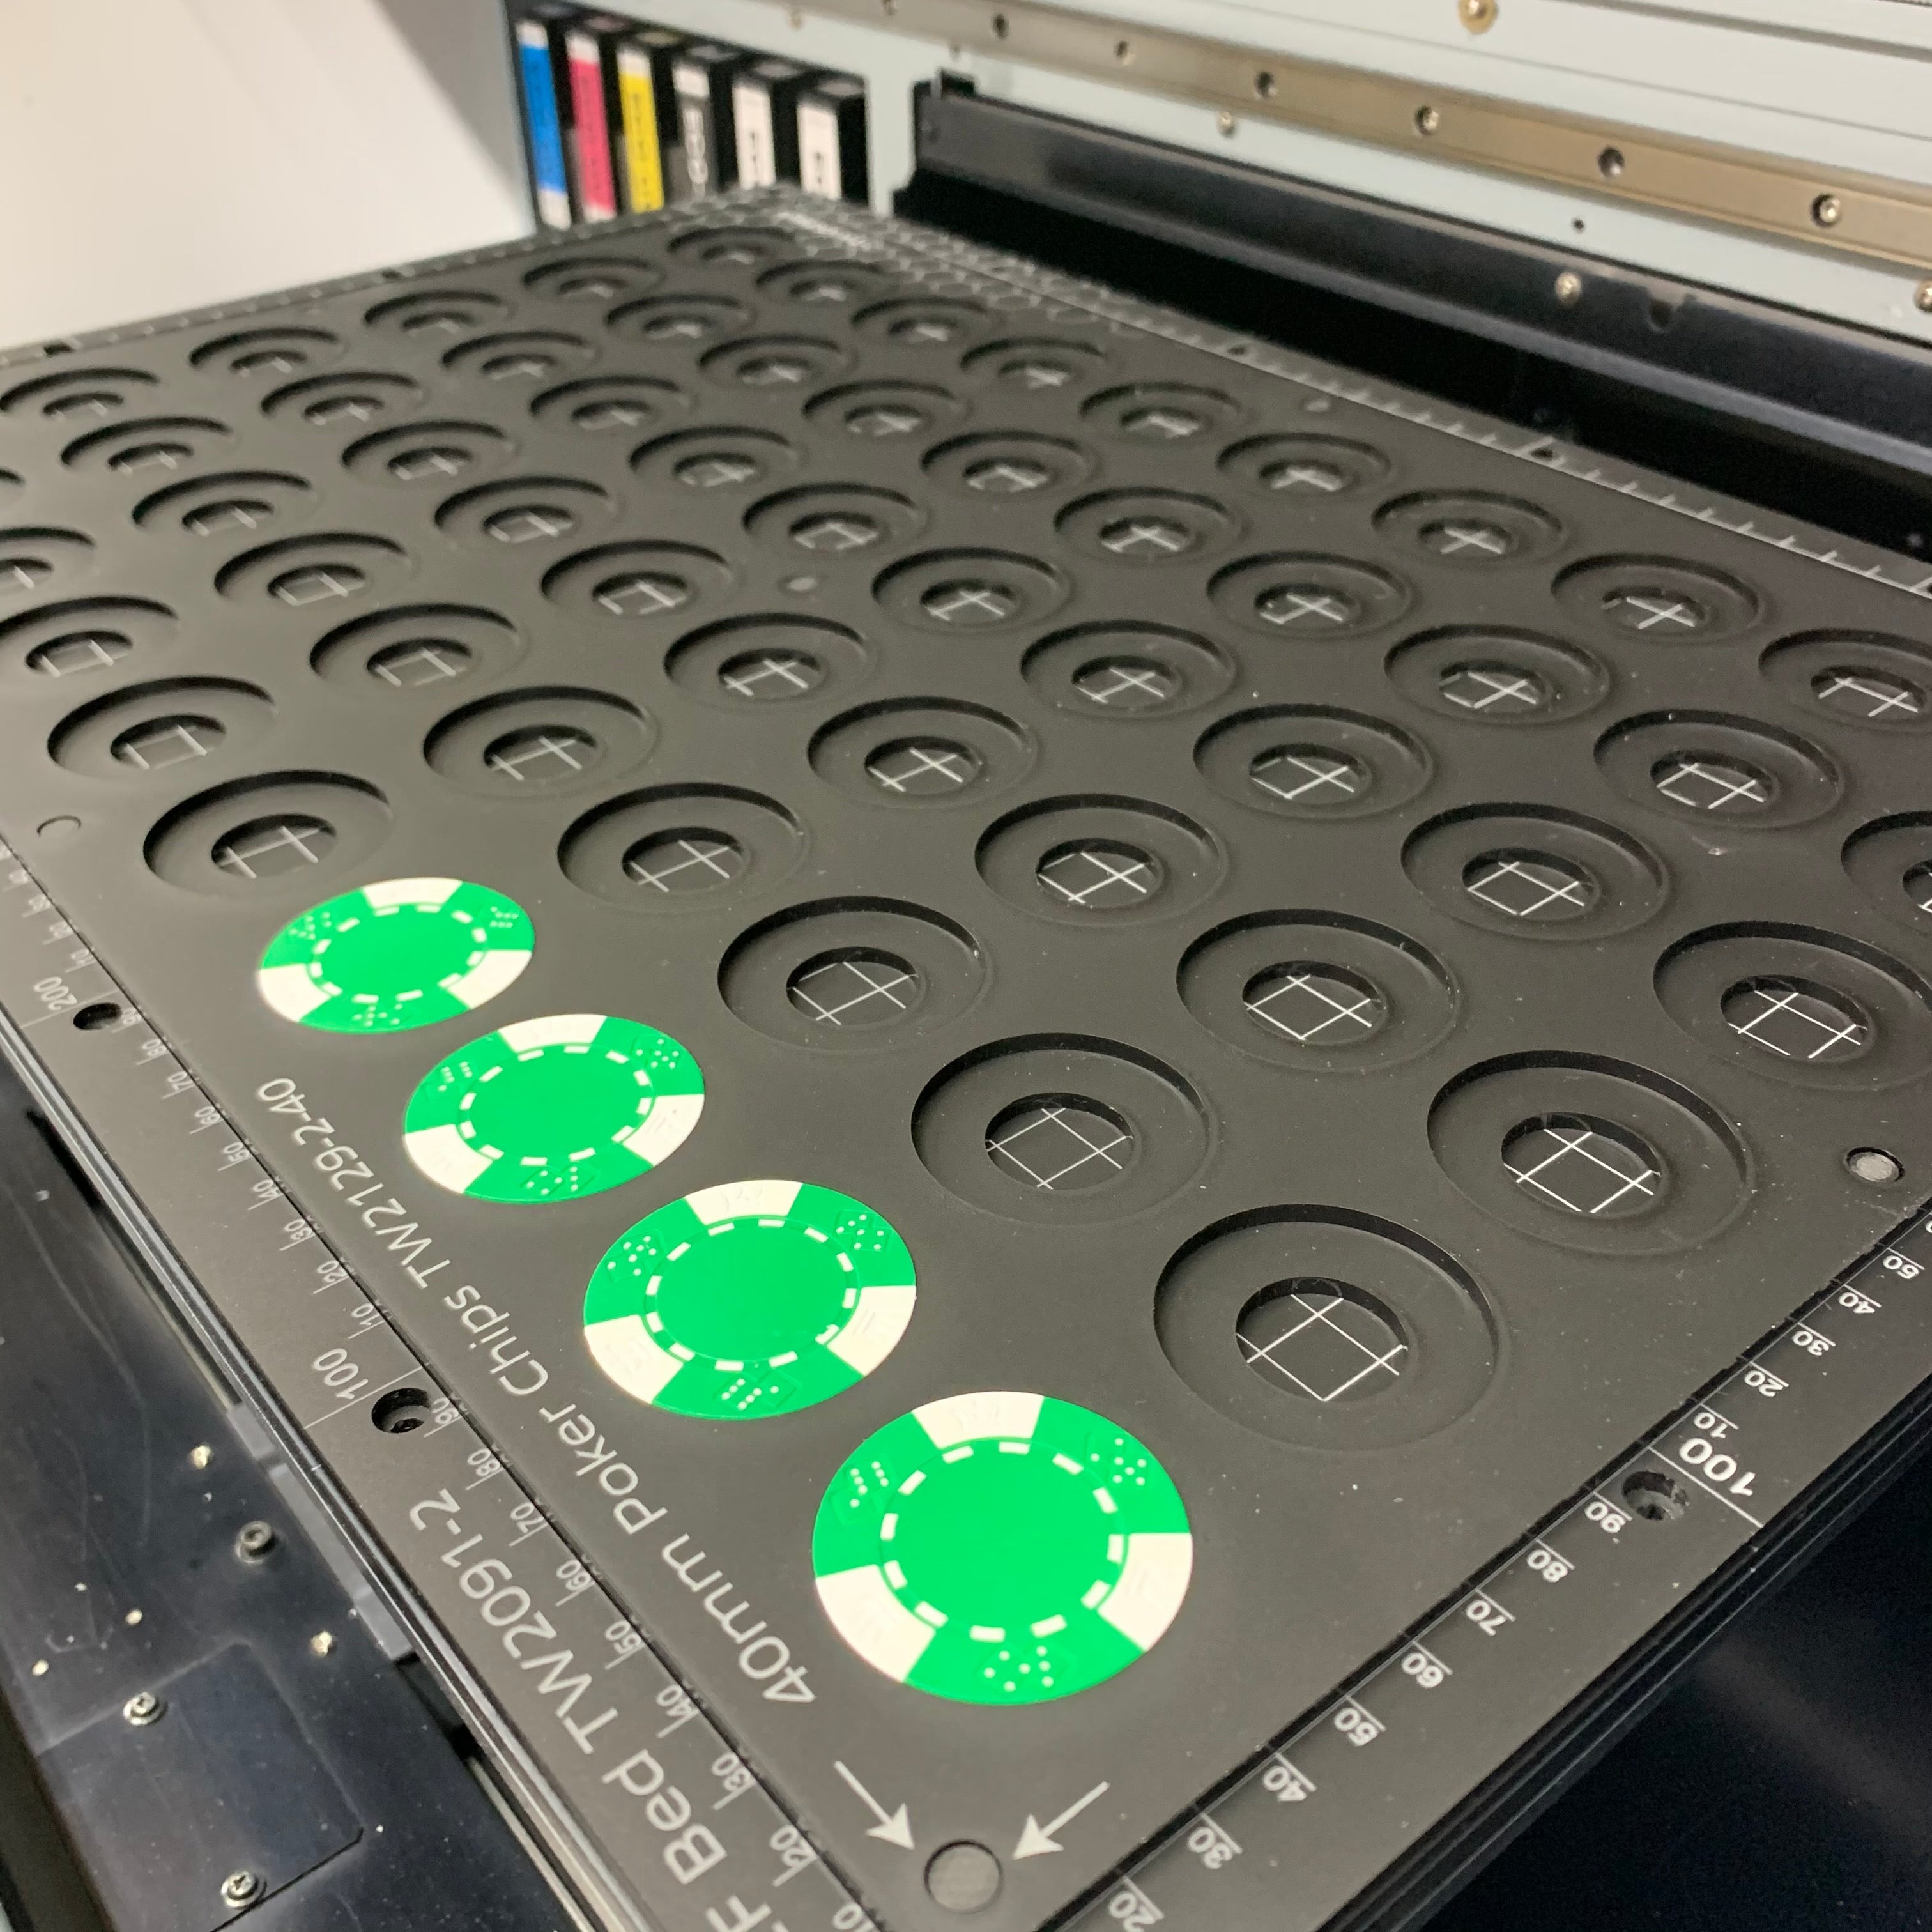 Poker Chip Printing Jig for 39mm / 40mm Poker Chips -Roland MO-240 Flatbed Printer (TBA Spaces)